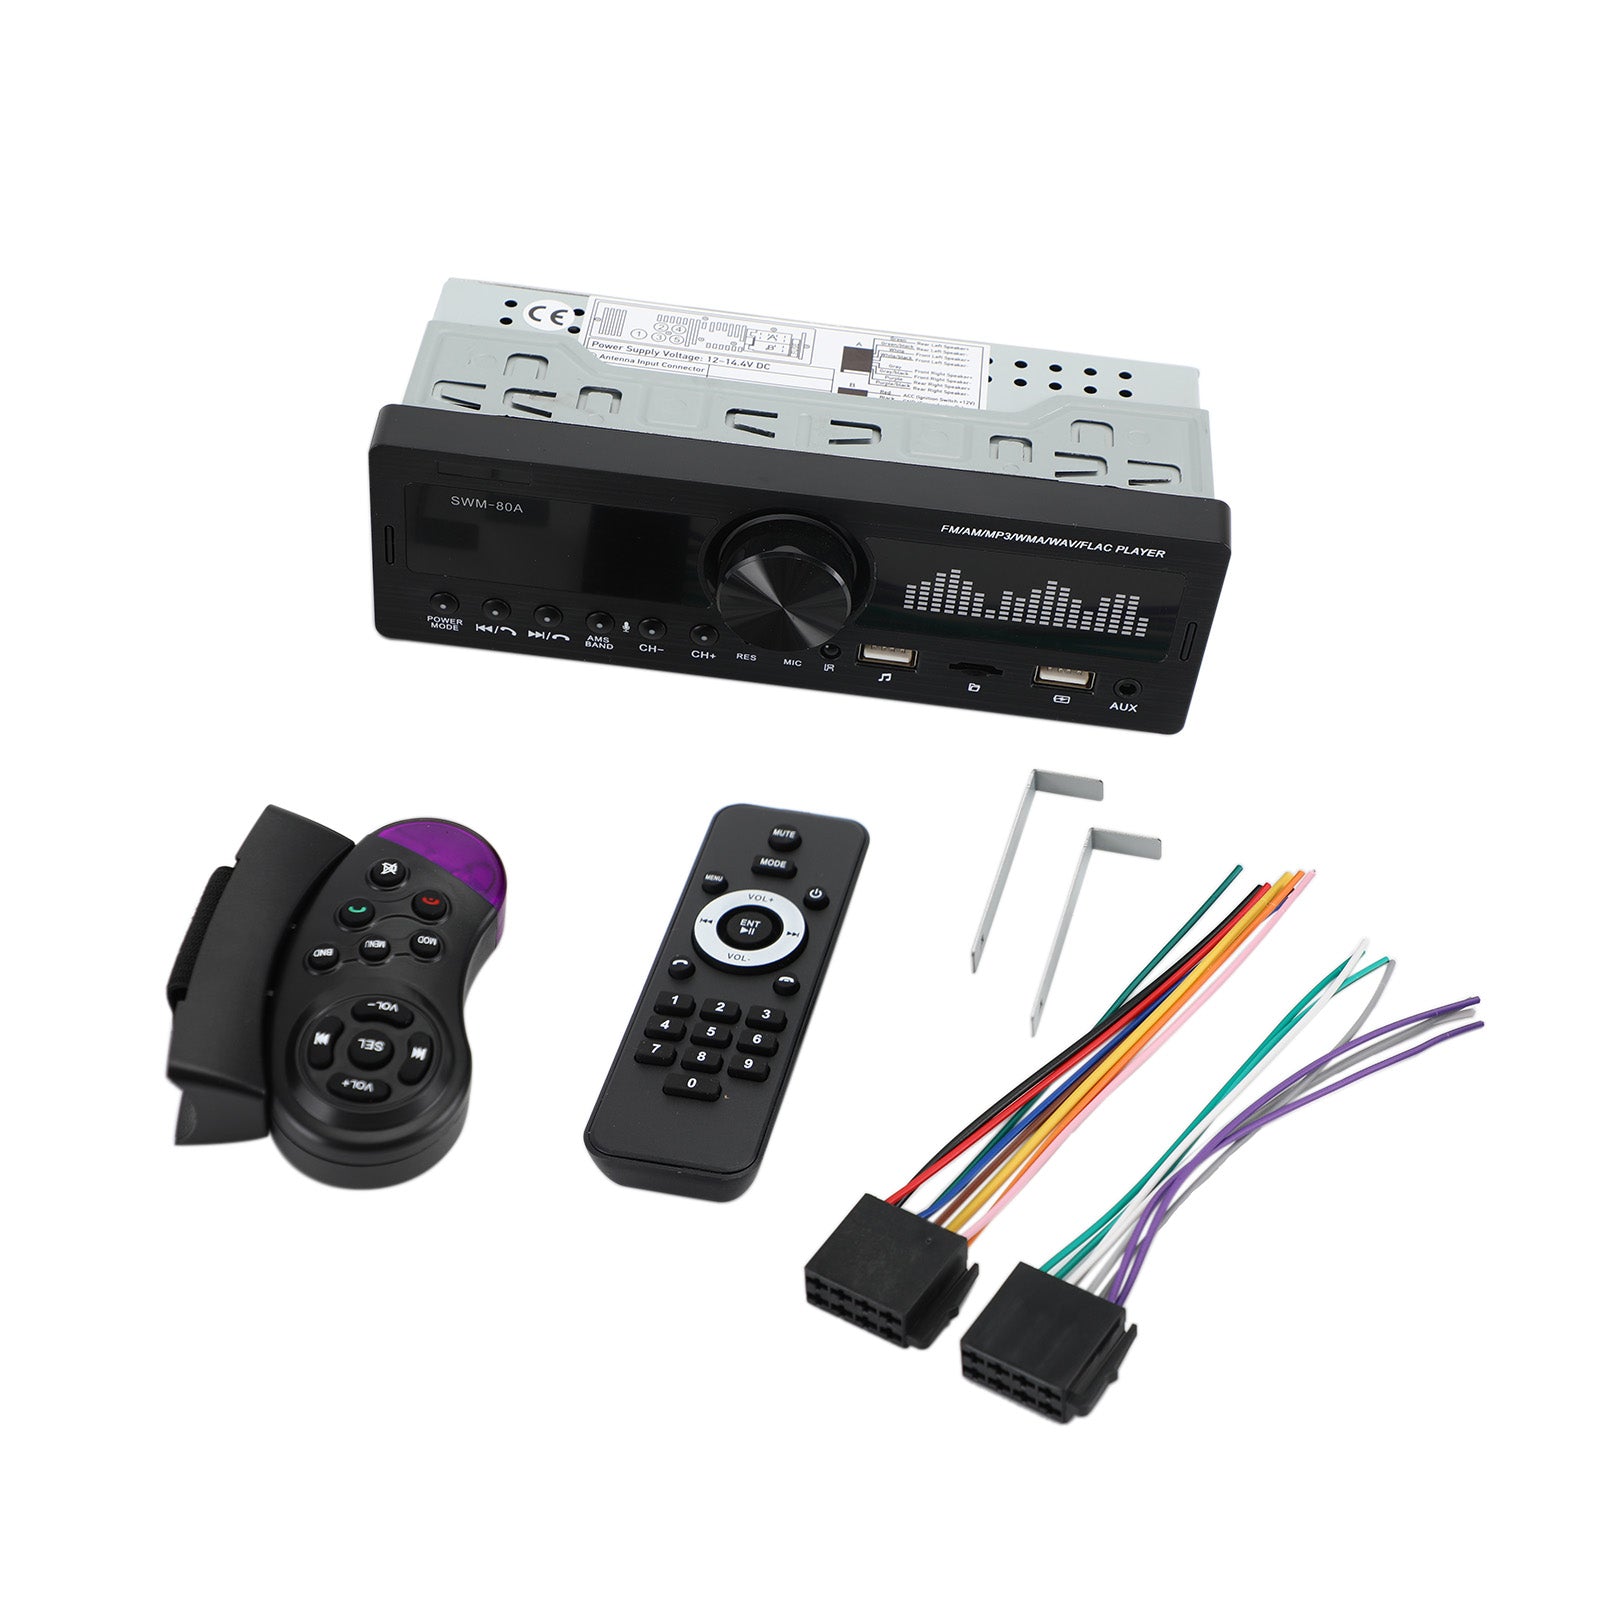 SWM-80A 1 DIN Car Stereo Radio Supporting Positioning MP3 Player Bluetooth FM AM